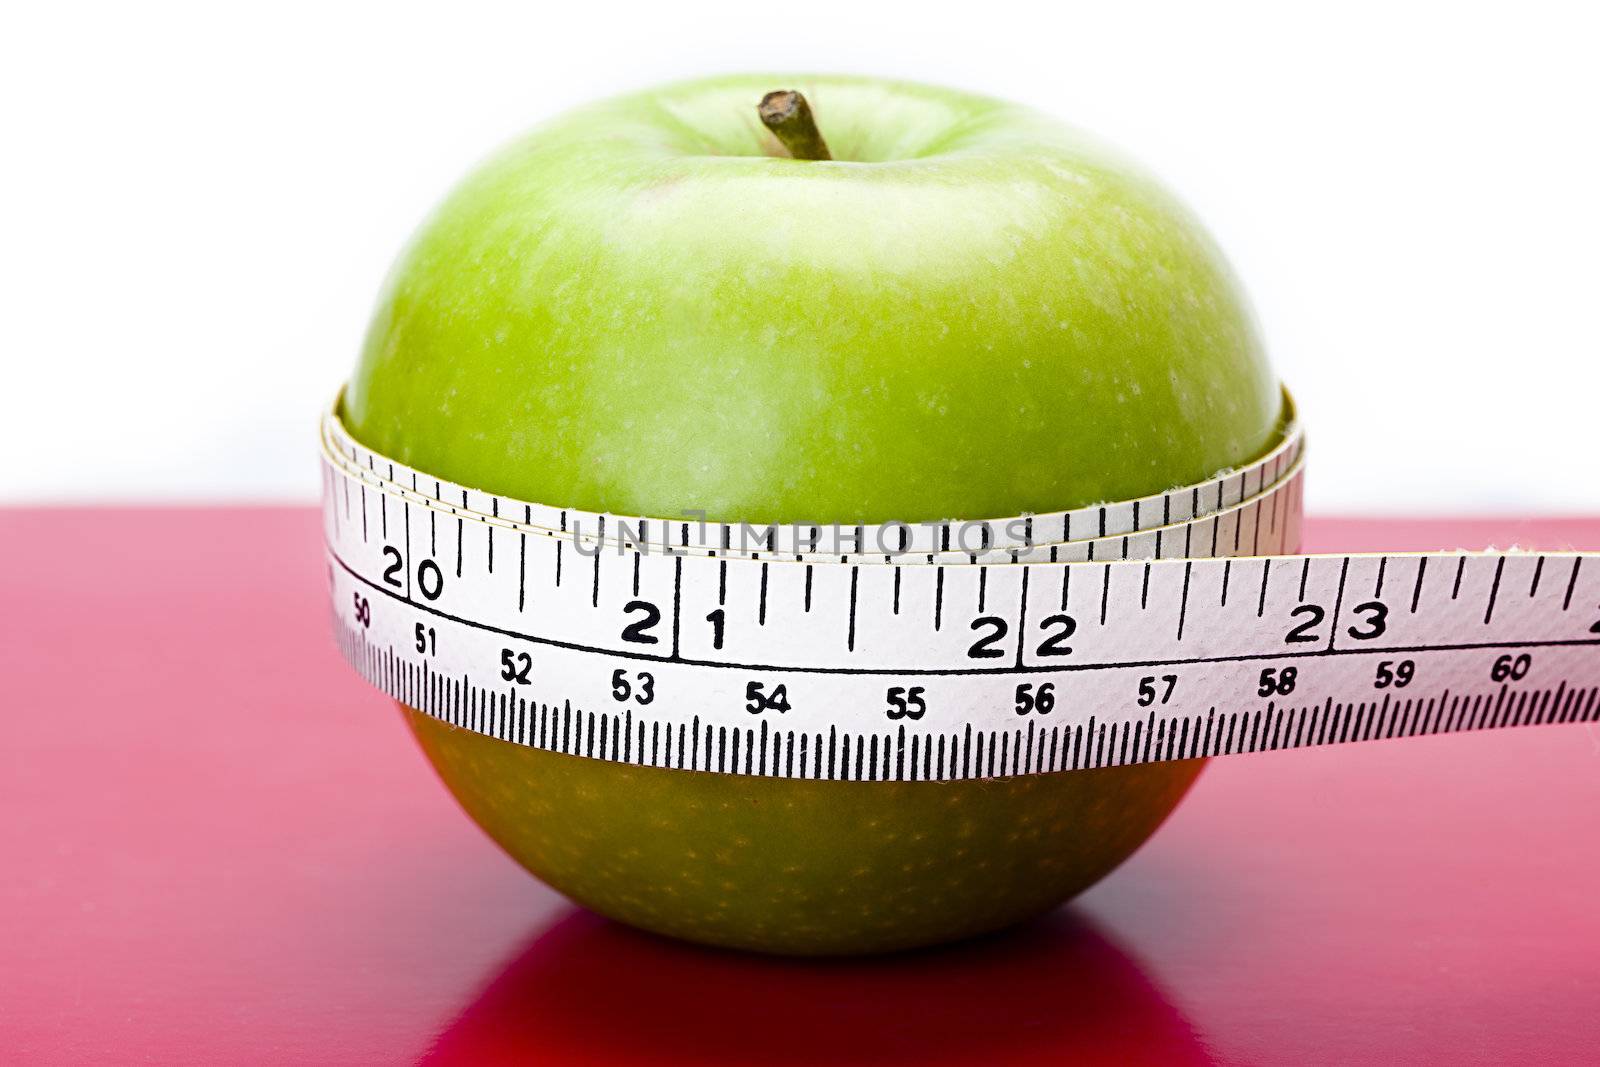 Shot of an apple on a table with a measuring tape around it.